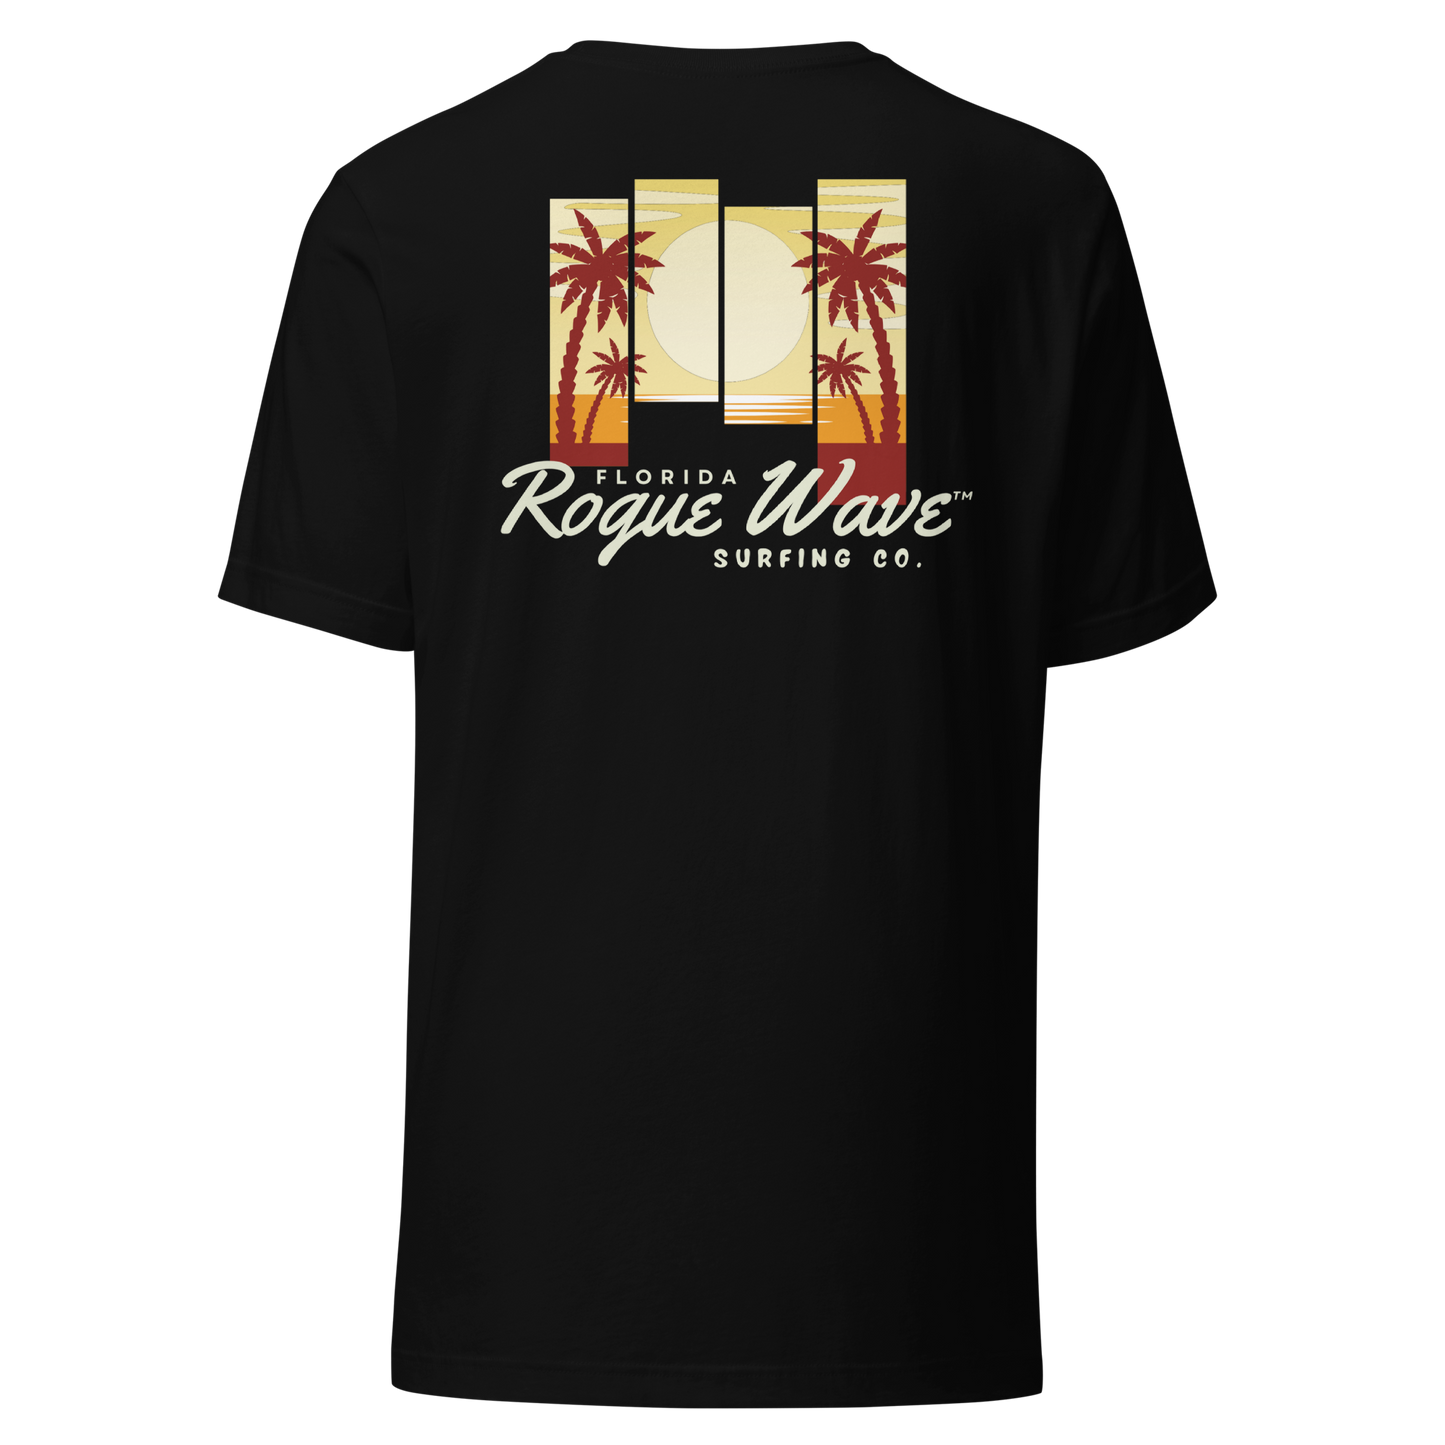 Rogue Wave Surfing Co™ Florida T-Shirt